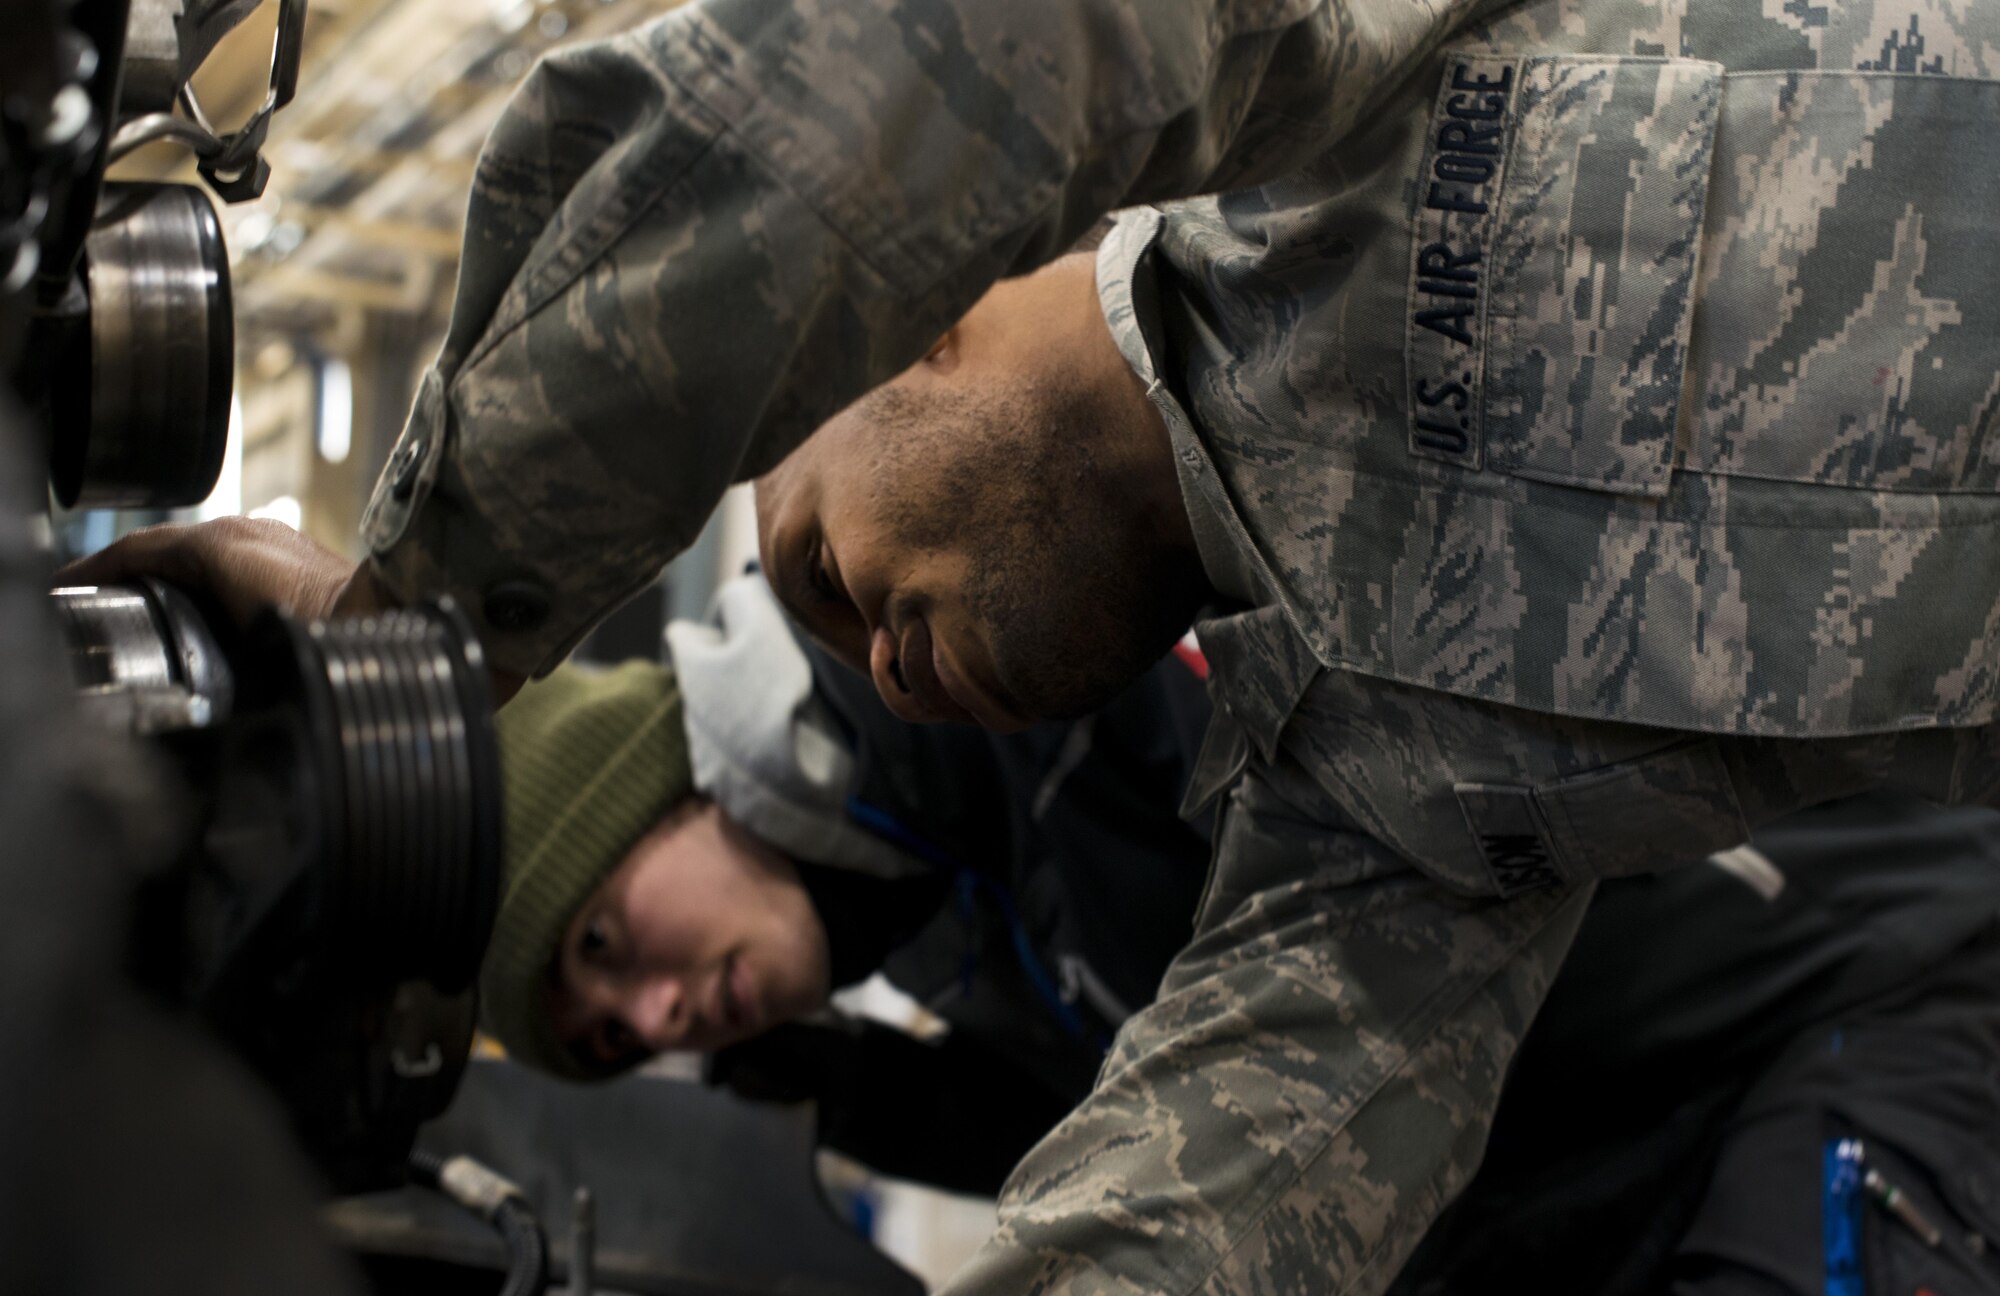 Staff Sgt. Travias Ellison, 86th Vehicle Readiness Squadron mission generation technician, shows Hendrik Ecker, 86th VRS vehicle mechanic technician, the engine of a 4 Bobtail vehicle at Ramstein Air Base, Germany, Nov. 14, 2016. Ecker, along with 20 other local nationals, partnered with Ramstein to receive practical hands-on skills as well as classroom education in their respective field. (U.S. Air Force photo by Senior Airman Tryphena Mayhugh)